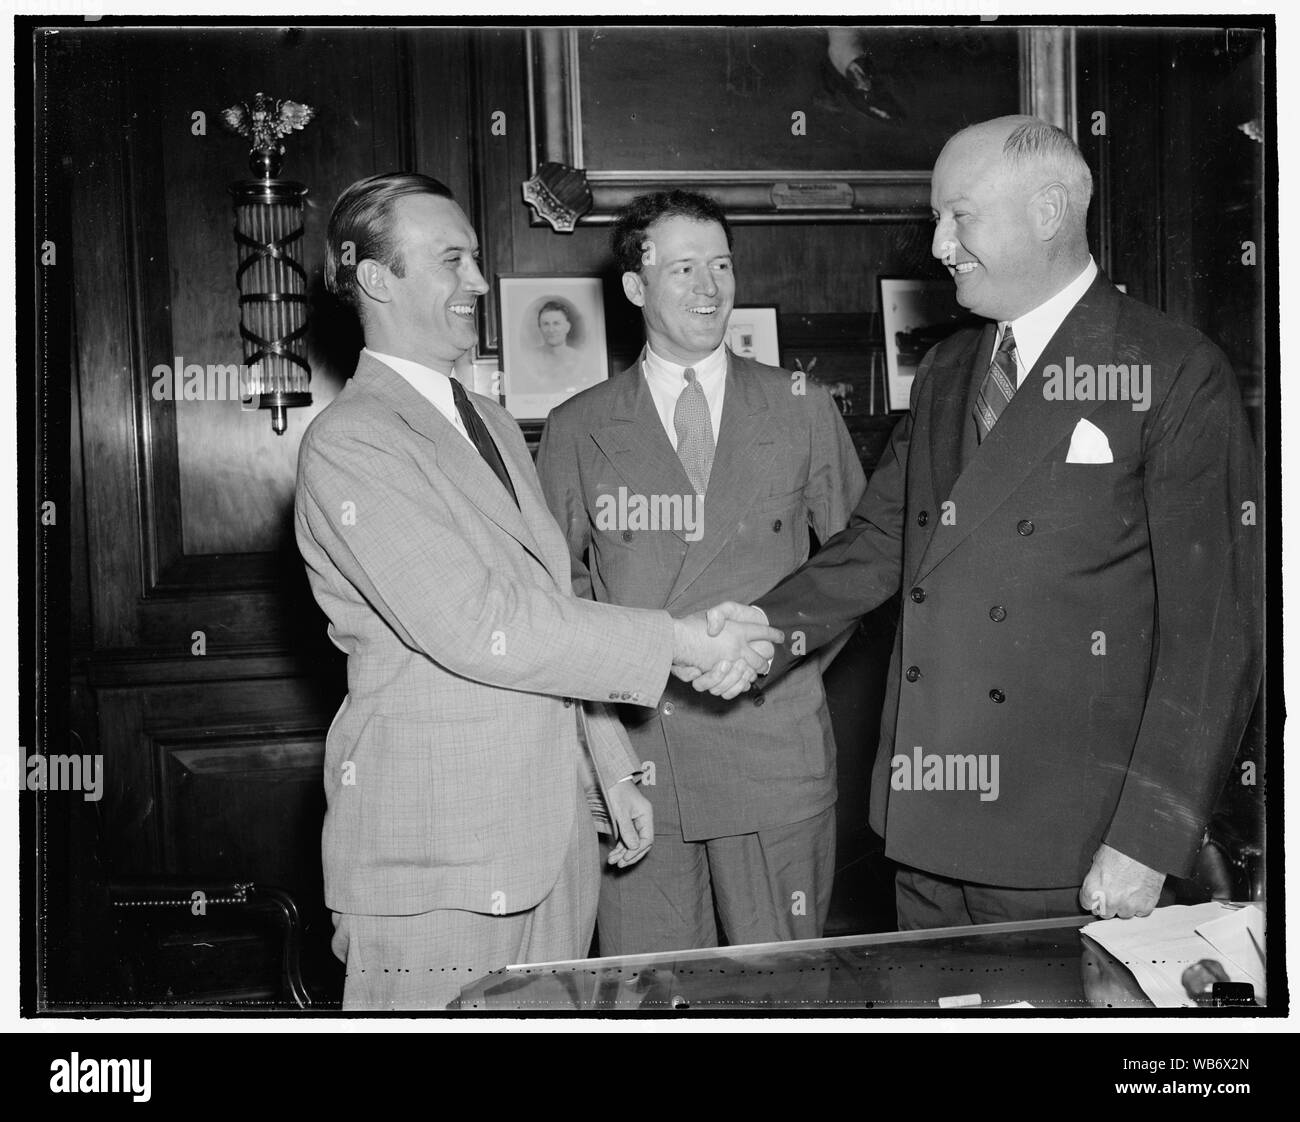 Farley meets new leader of young democrats. Washington, D.C. Aug 25. Newly elected president of the Young Democrats of America, Pitt. T. Maner, shakes hands with Jim Farley, while John P. Kohn, Jr., Maners campaign manager, looks on Abstract/medium: 1 negative : glass ; 4 x 5 in. or smaller Stock Photo